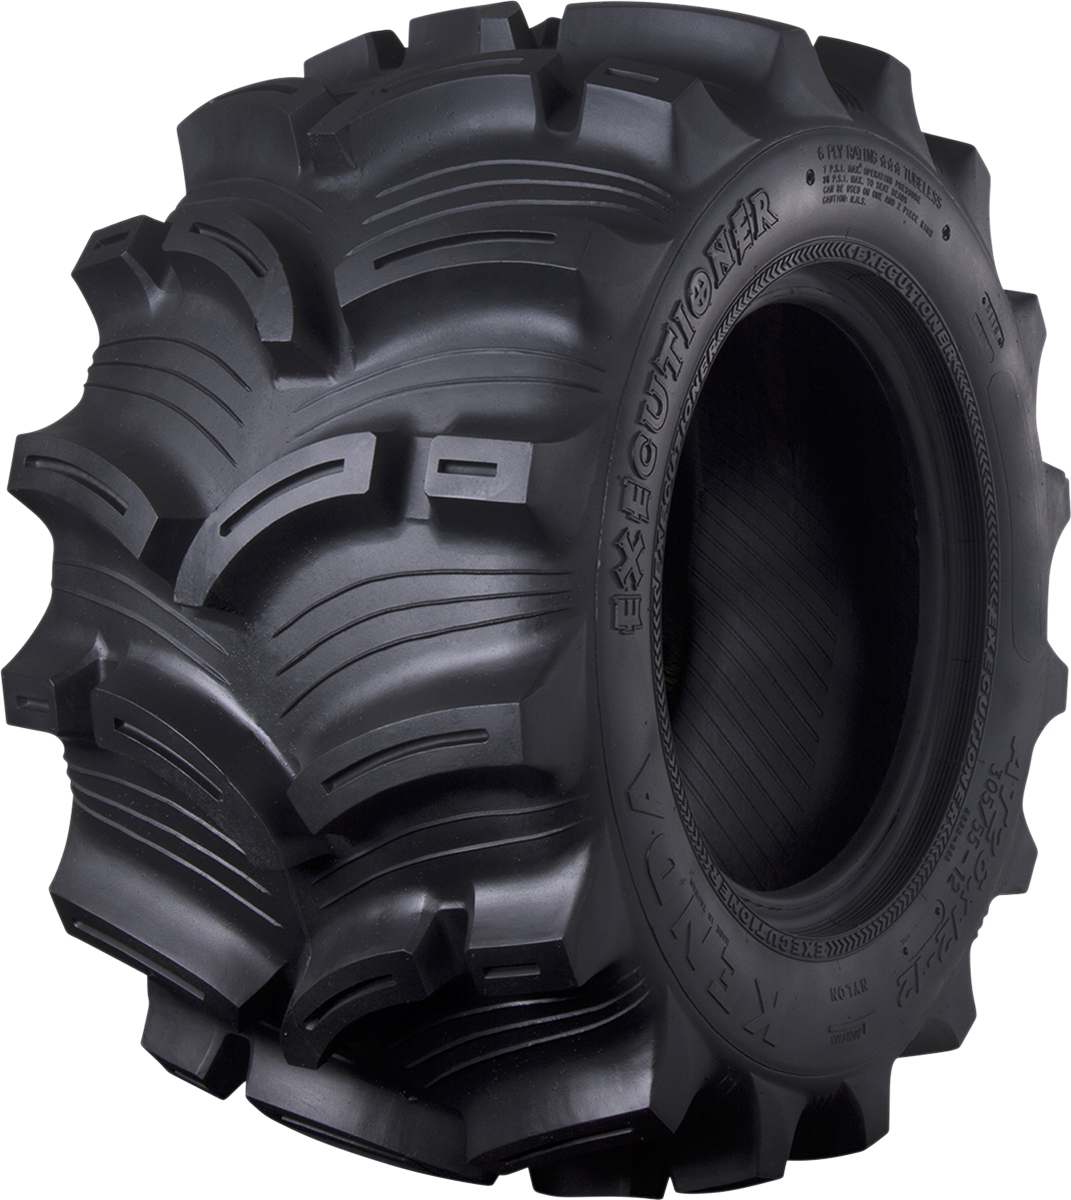 KENDA Tire - K538 Executioner - Front - 27x10-12 - 6 Ply 08538129BC1